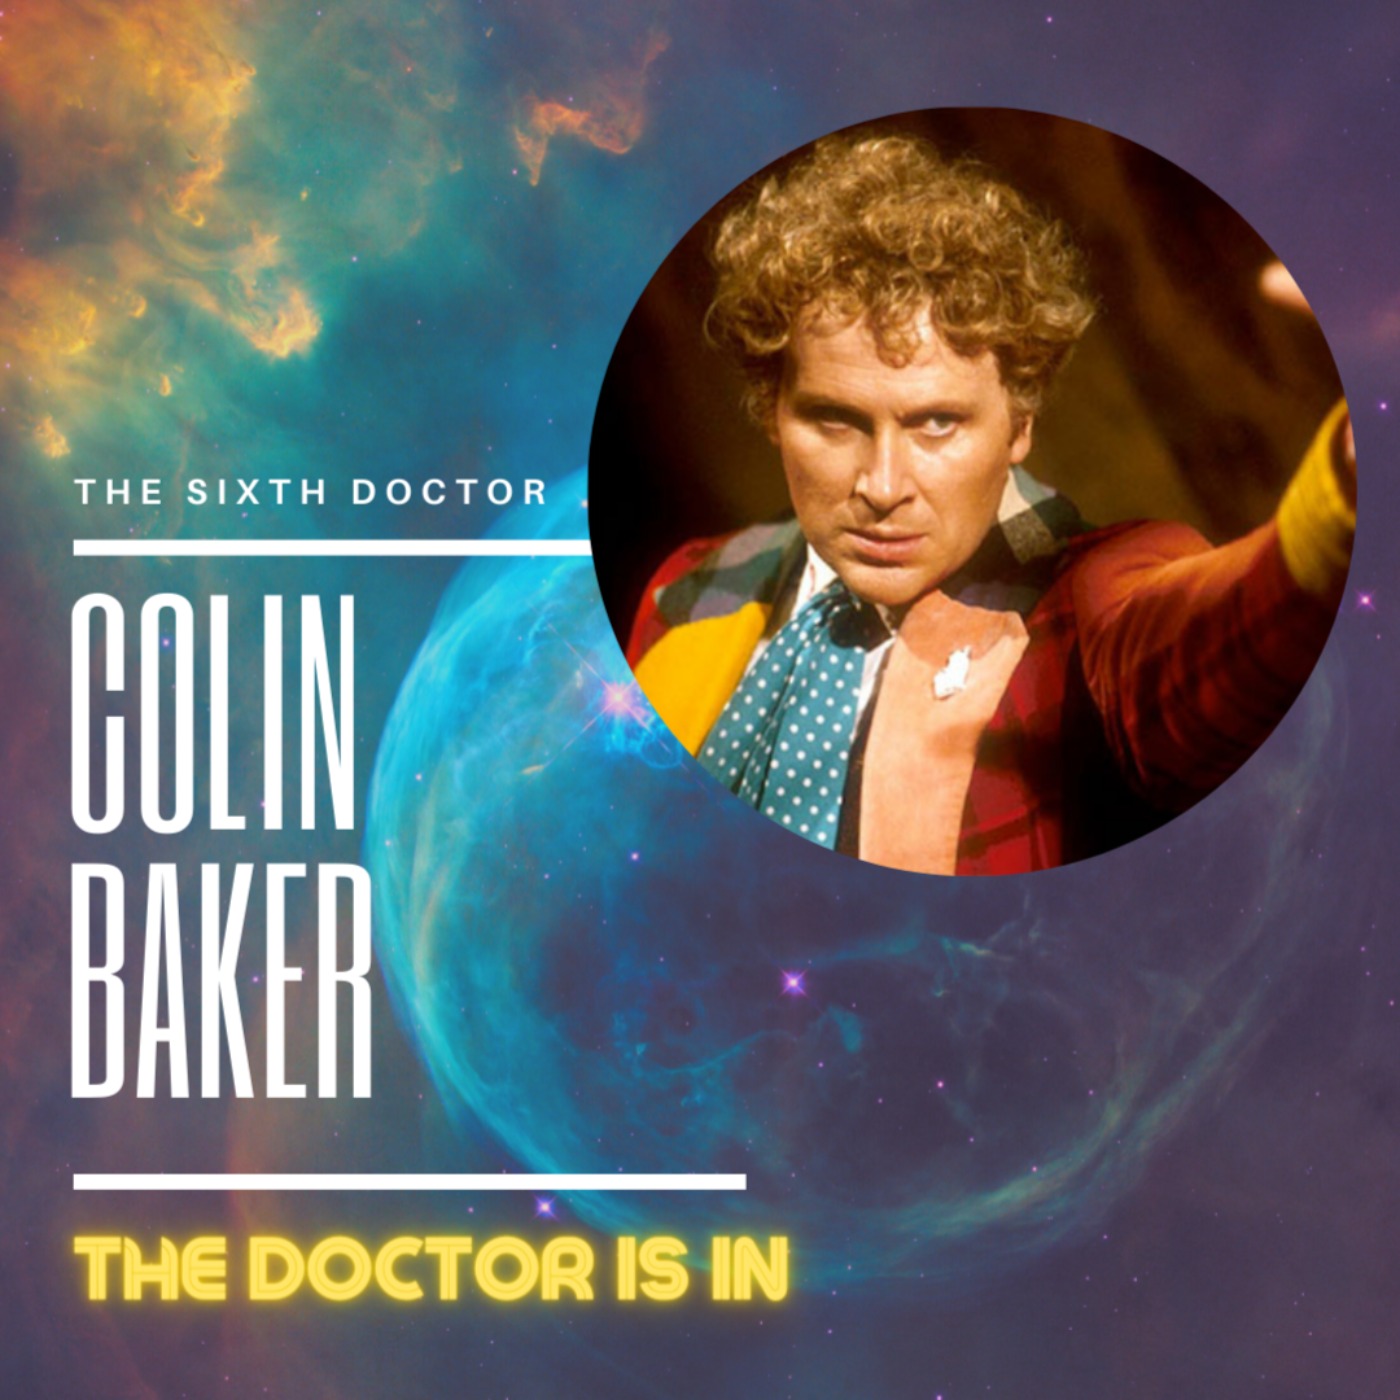 The Sixth Doctor, Colin Baker